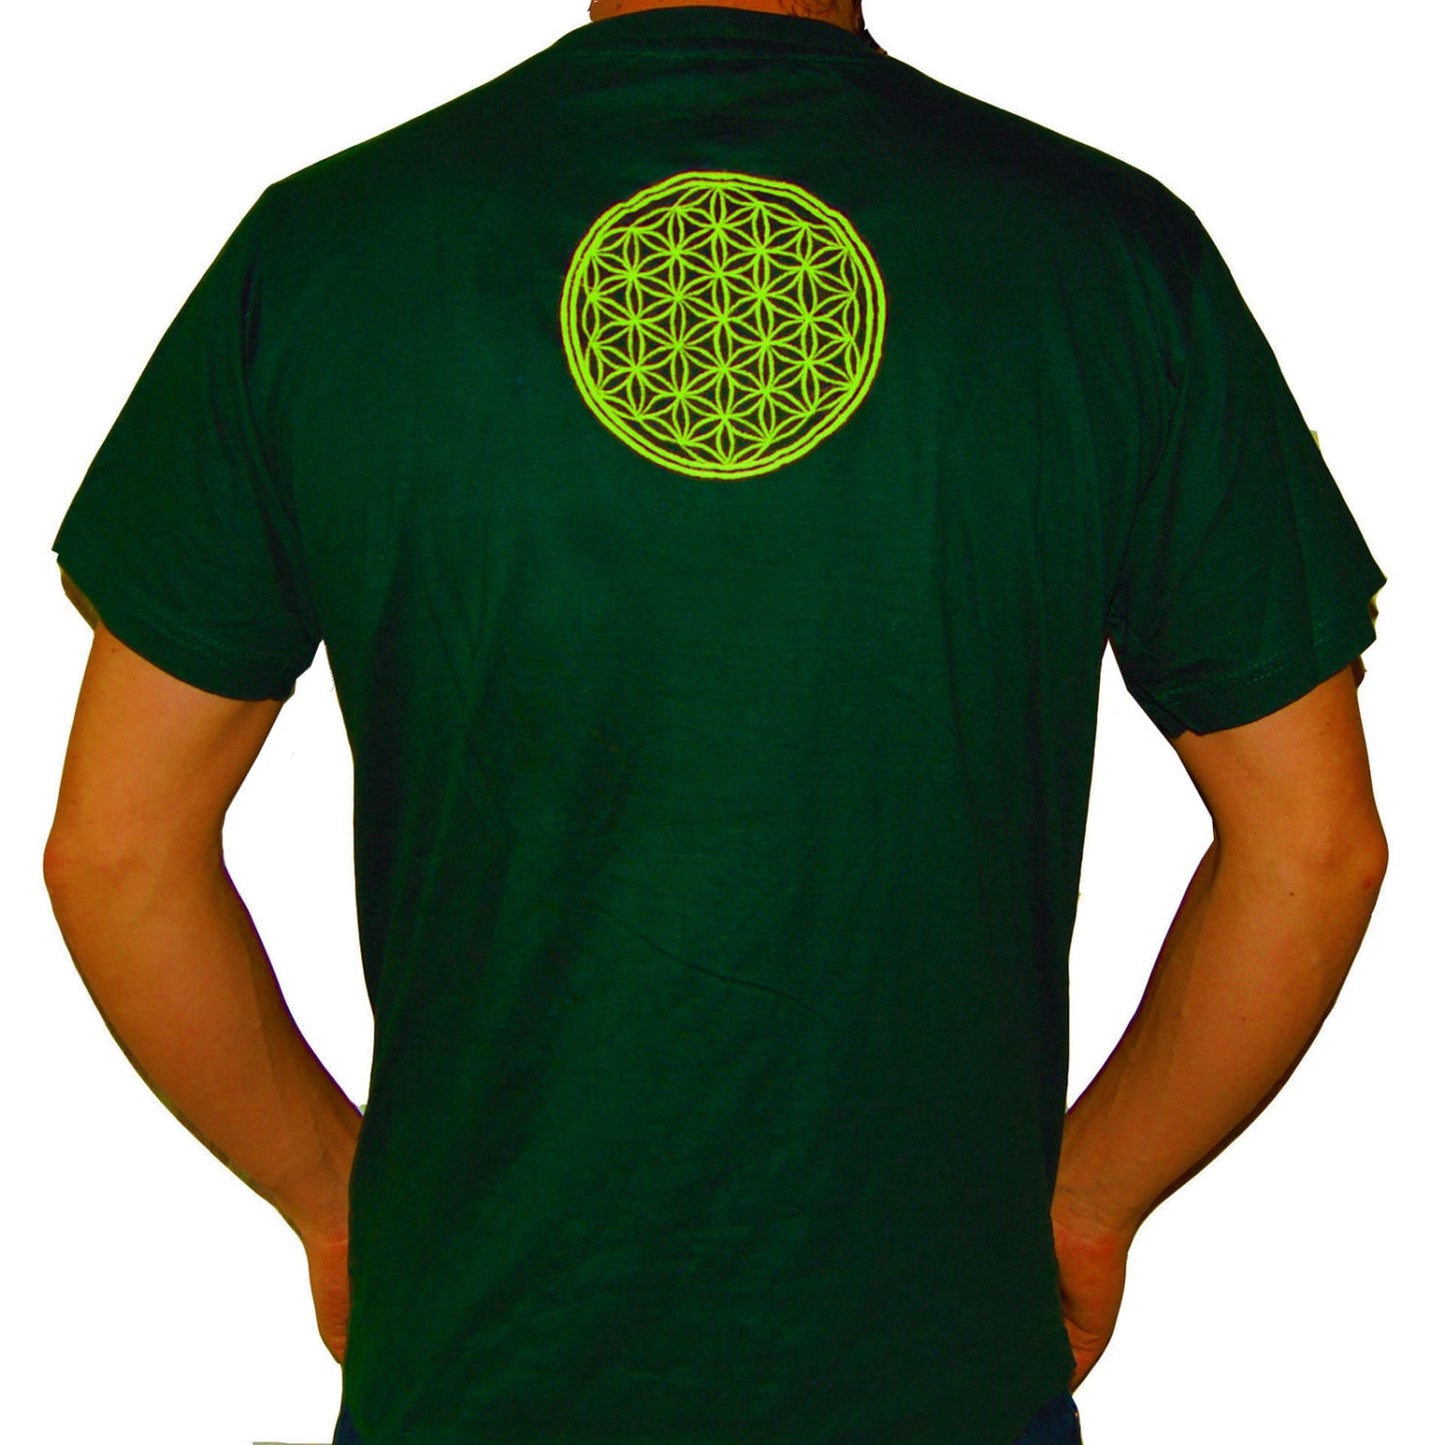 Seed of Life Star T-Shirt - sacred healing geometry seed of flower of life crop circle handmade embroidery no print